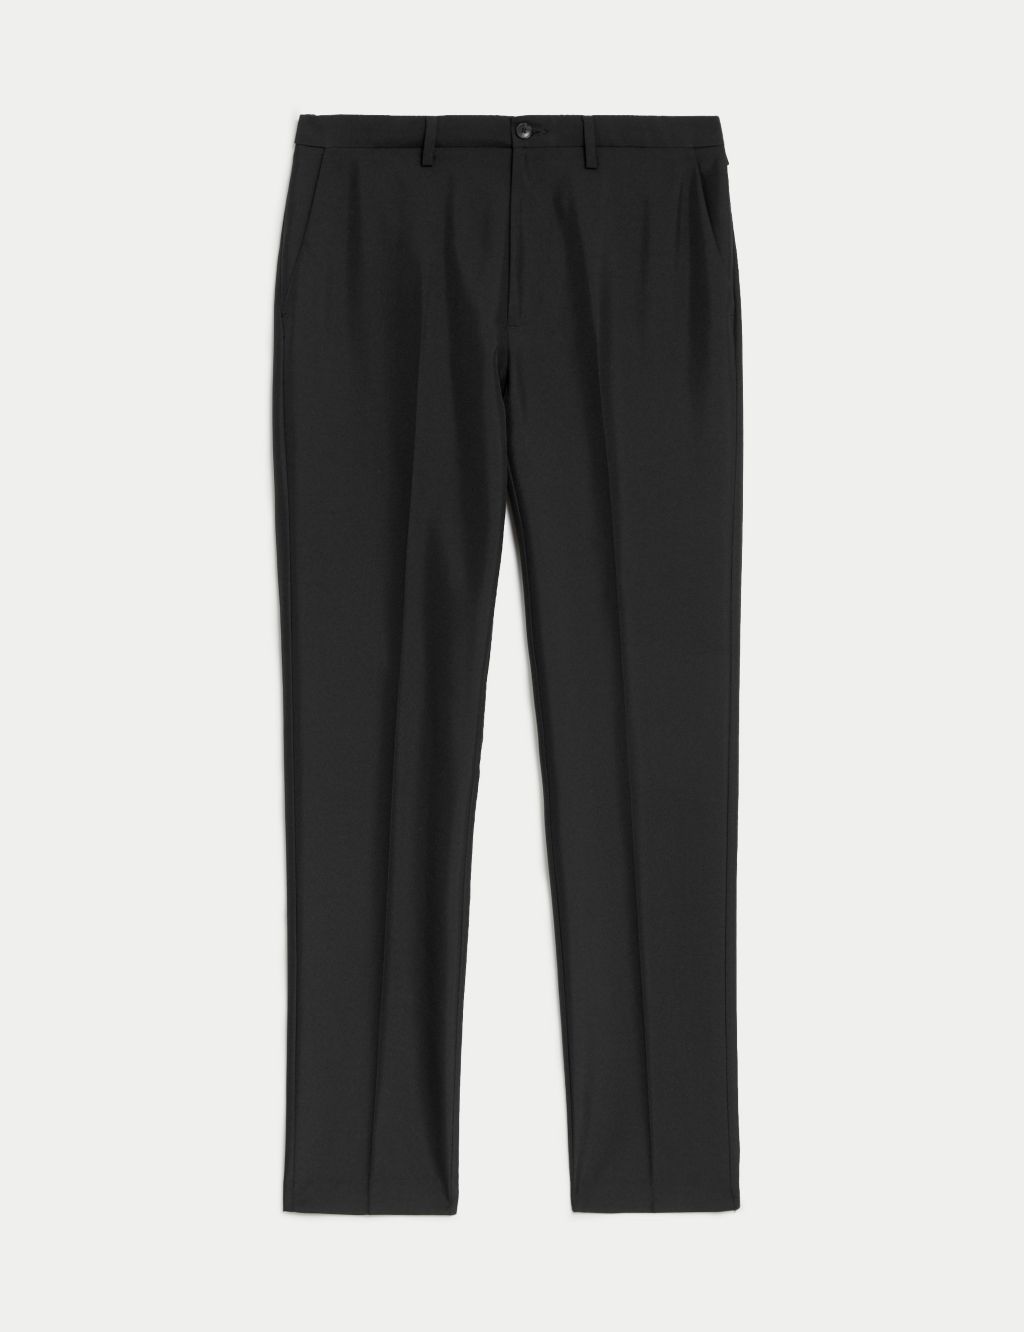 Slim Fit Trouser with Active Waist image 2